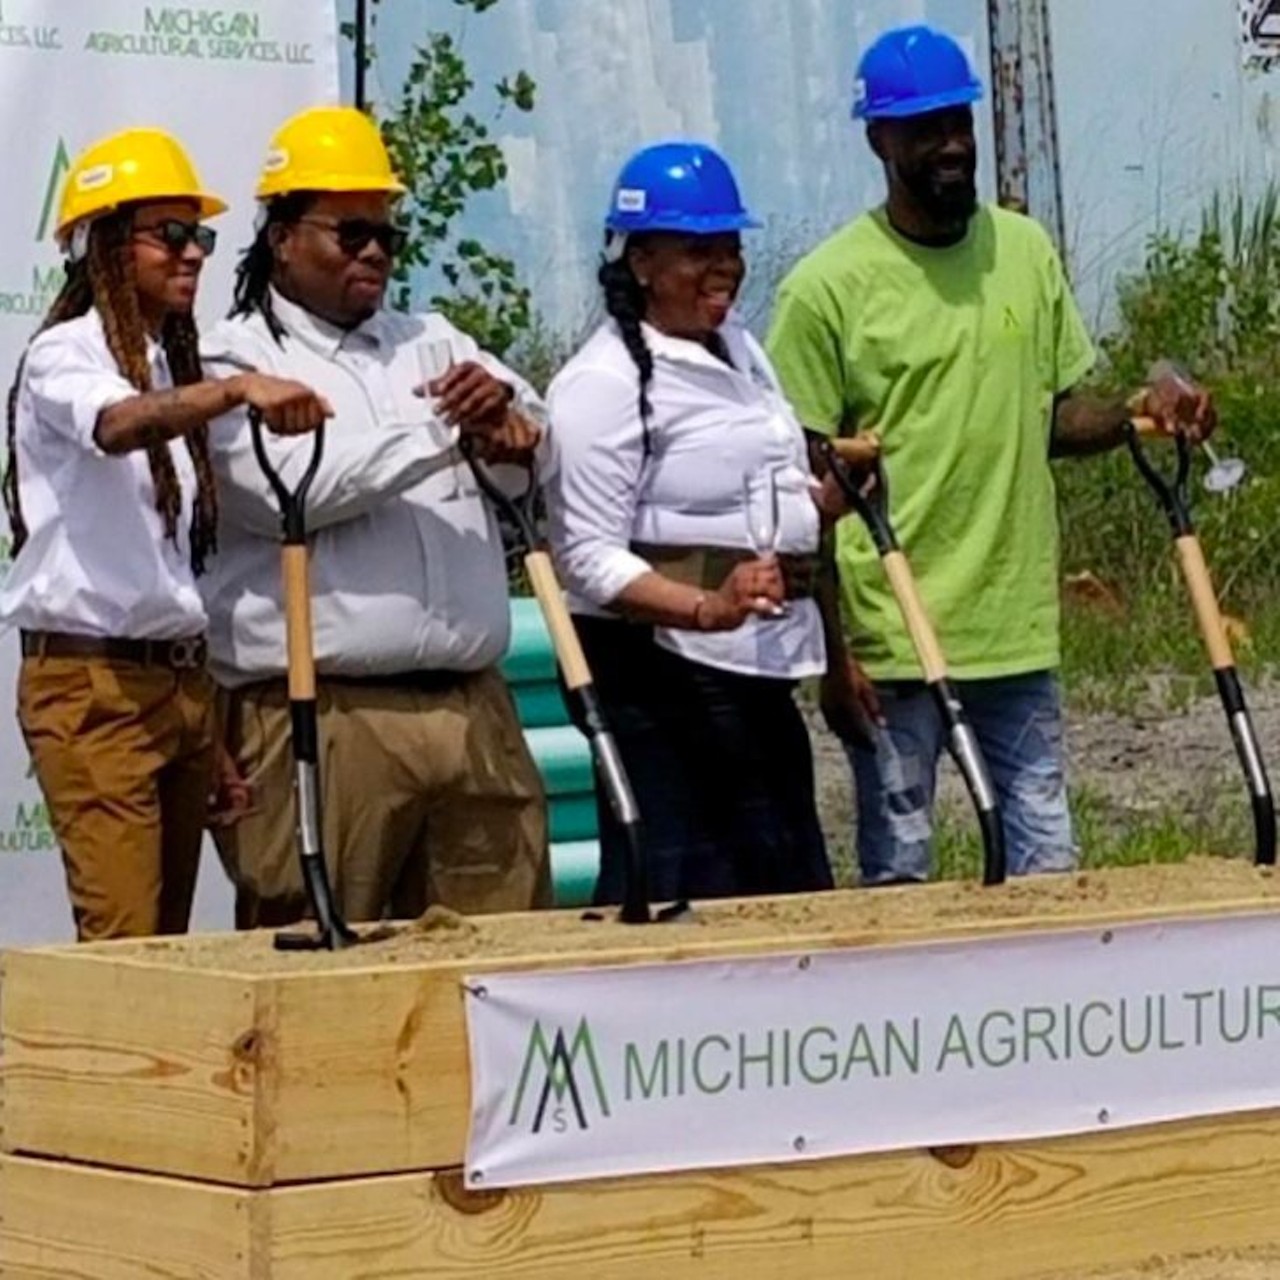 Michigan Agricultural Services
michagricultural.org
Michigan Agricultural Services is dedicated to the development and cultivation of cannabis in Michigan. It broke ground last spring on a $6 million growing and processing facility in Inkster. The facility, located at 2615 Bayhan, will operate as both a medical and recreational cannabis facility.
Photo via  Michigan Agricultural Services / Instagram